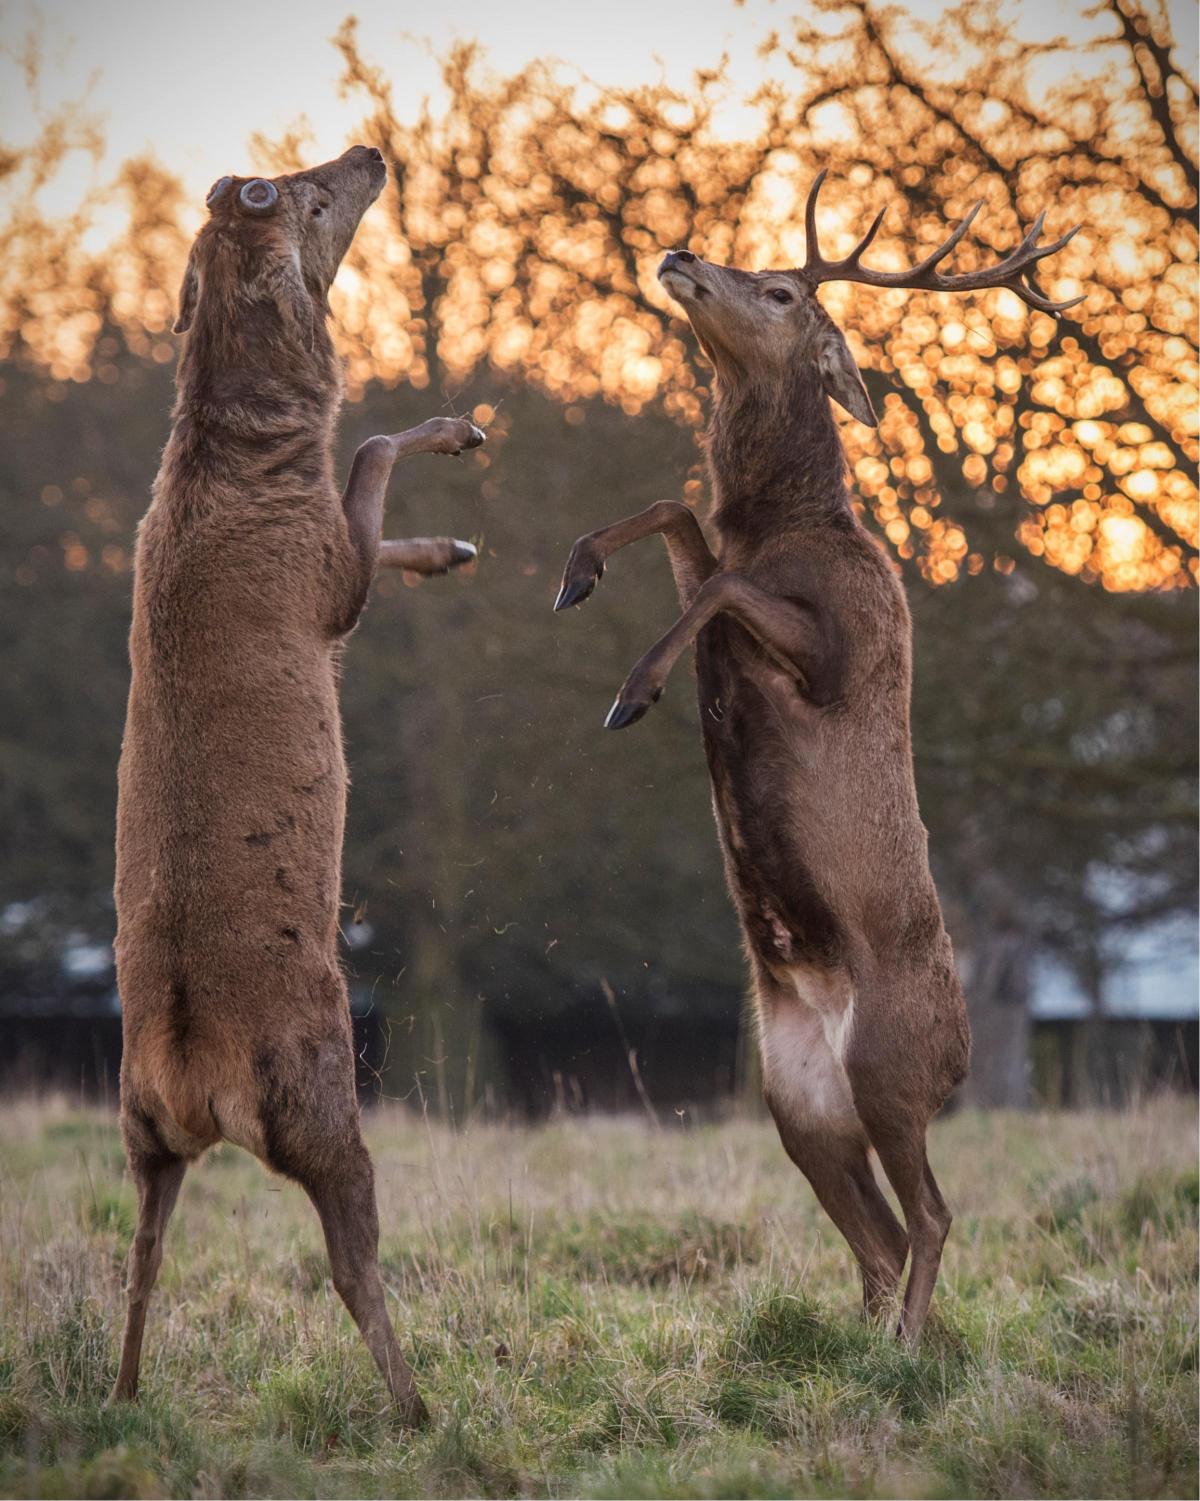 Sue Lindeberg saw the boxing stags in Bushy Park